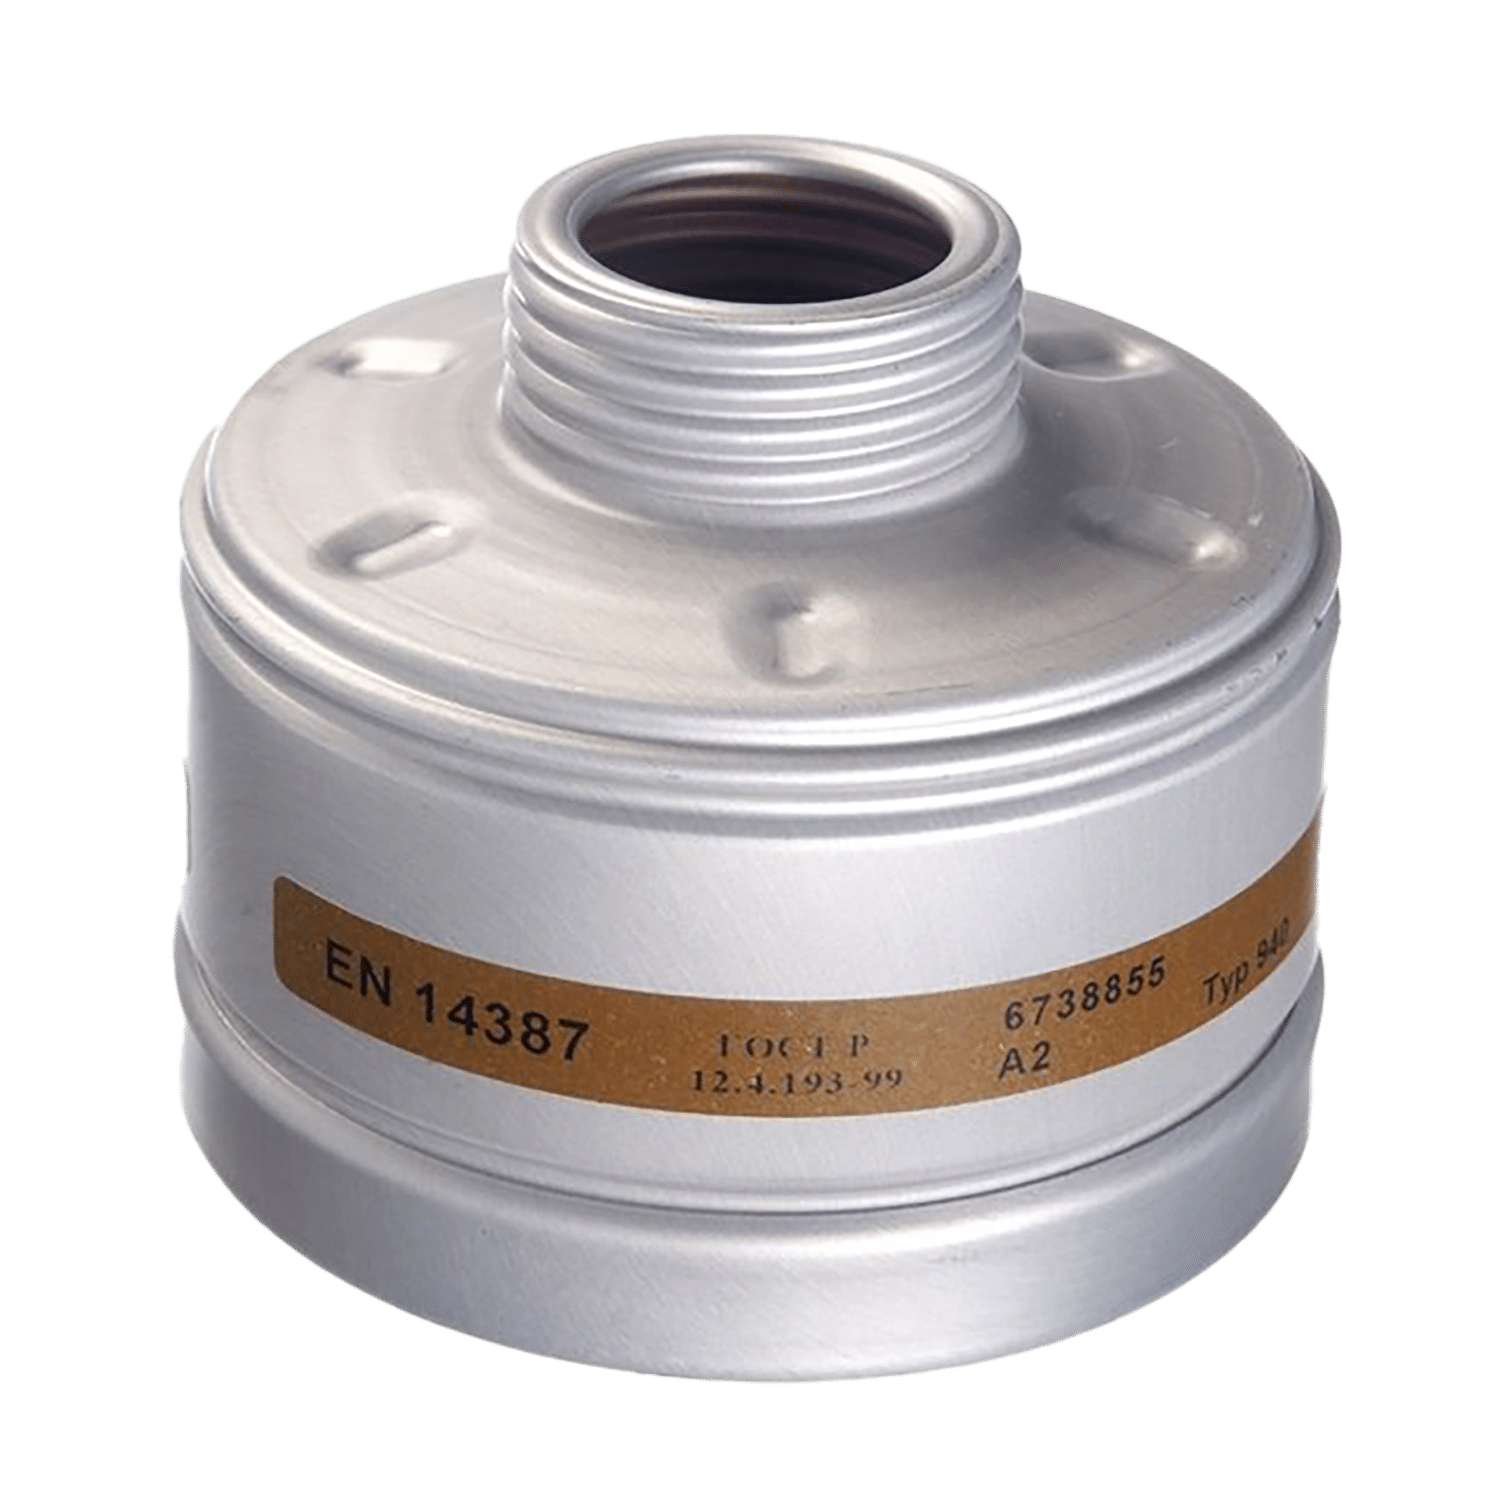 Draeger-Gasfilter-940-A2